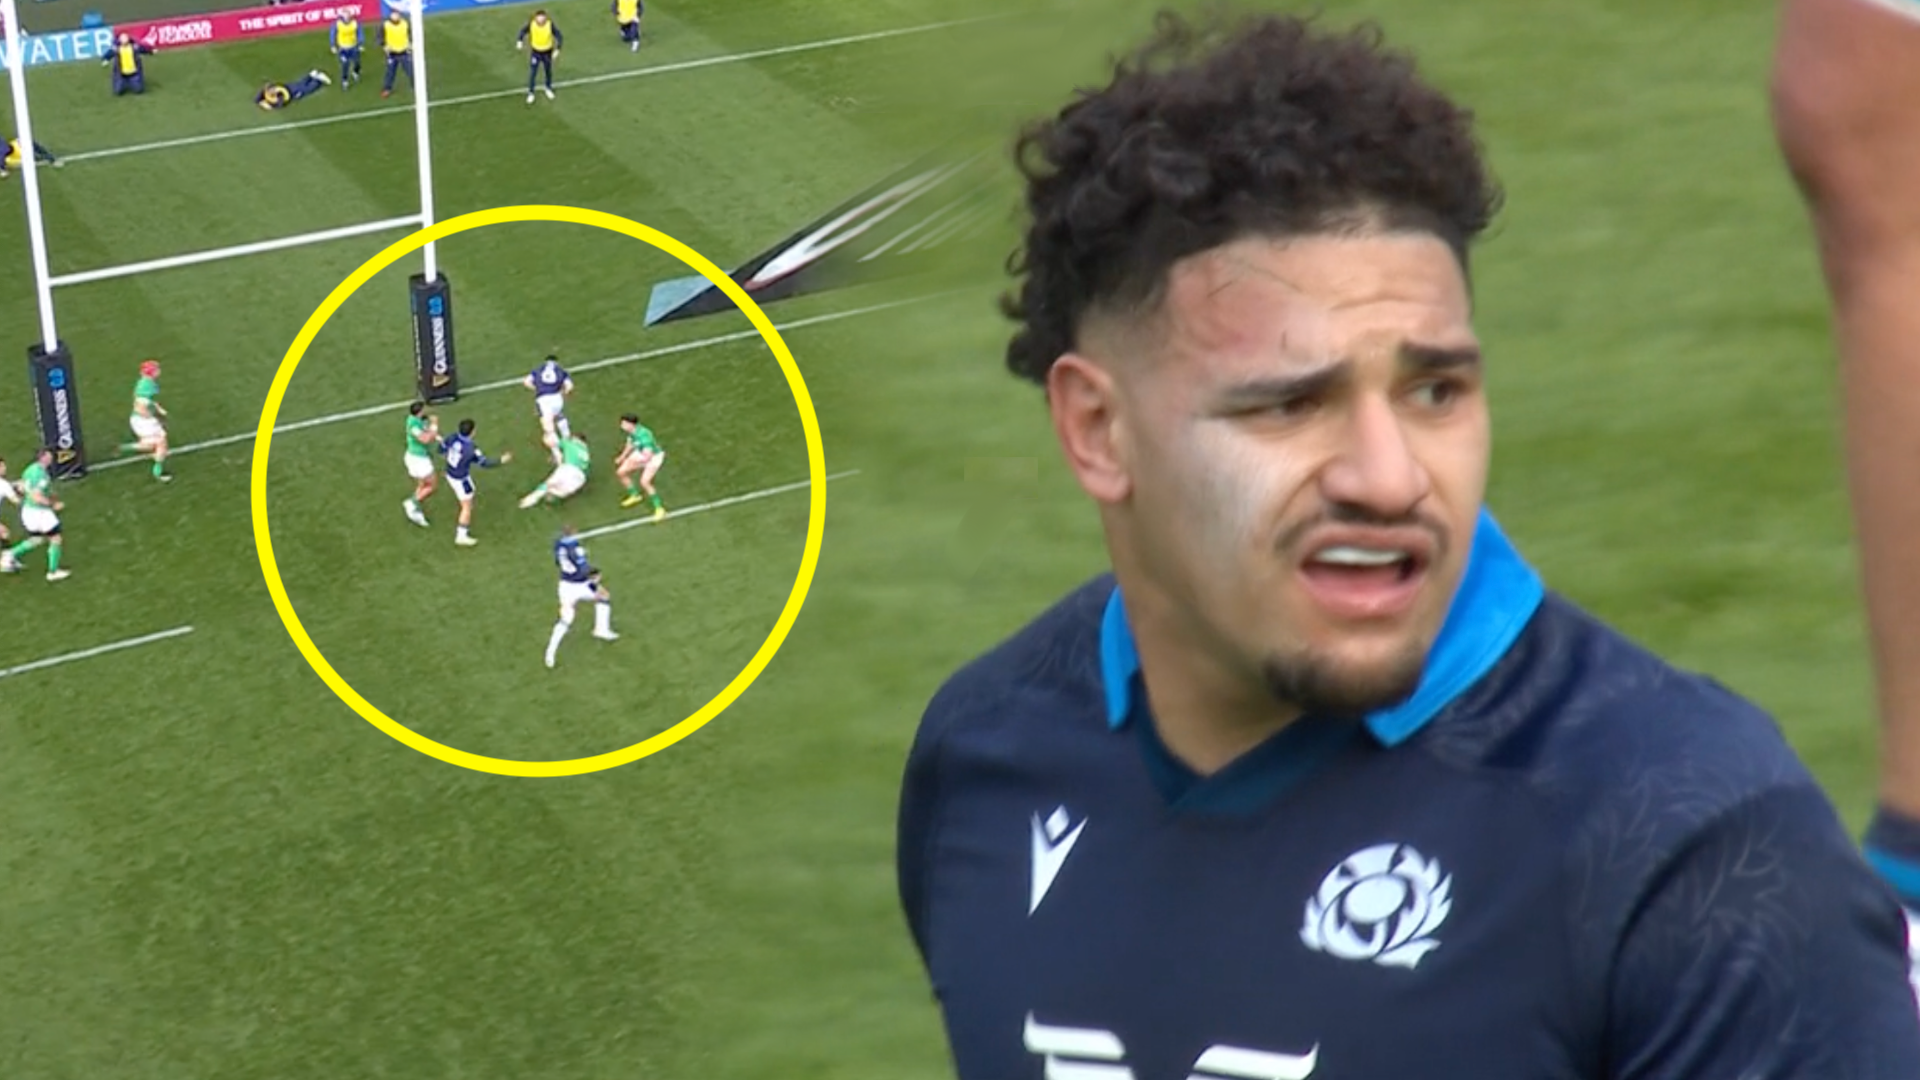 Scotland centre became Ireland's biggest enemy with this one off-ball incident